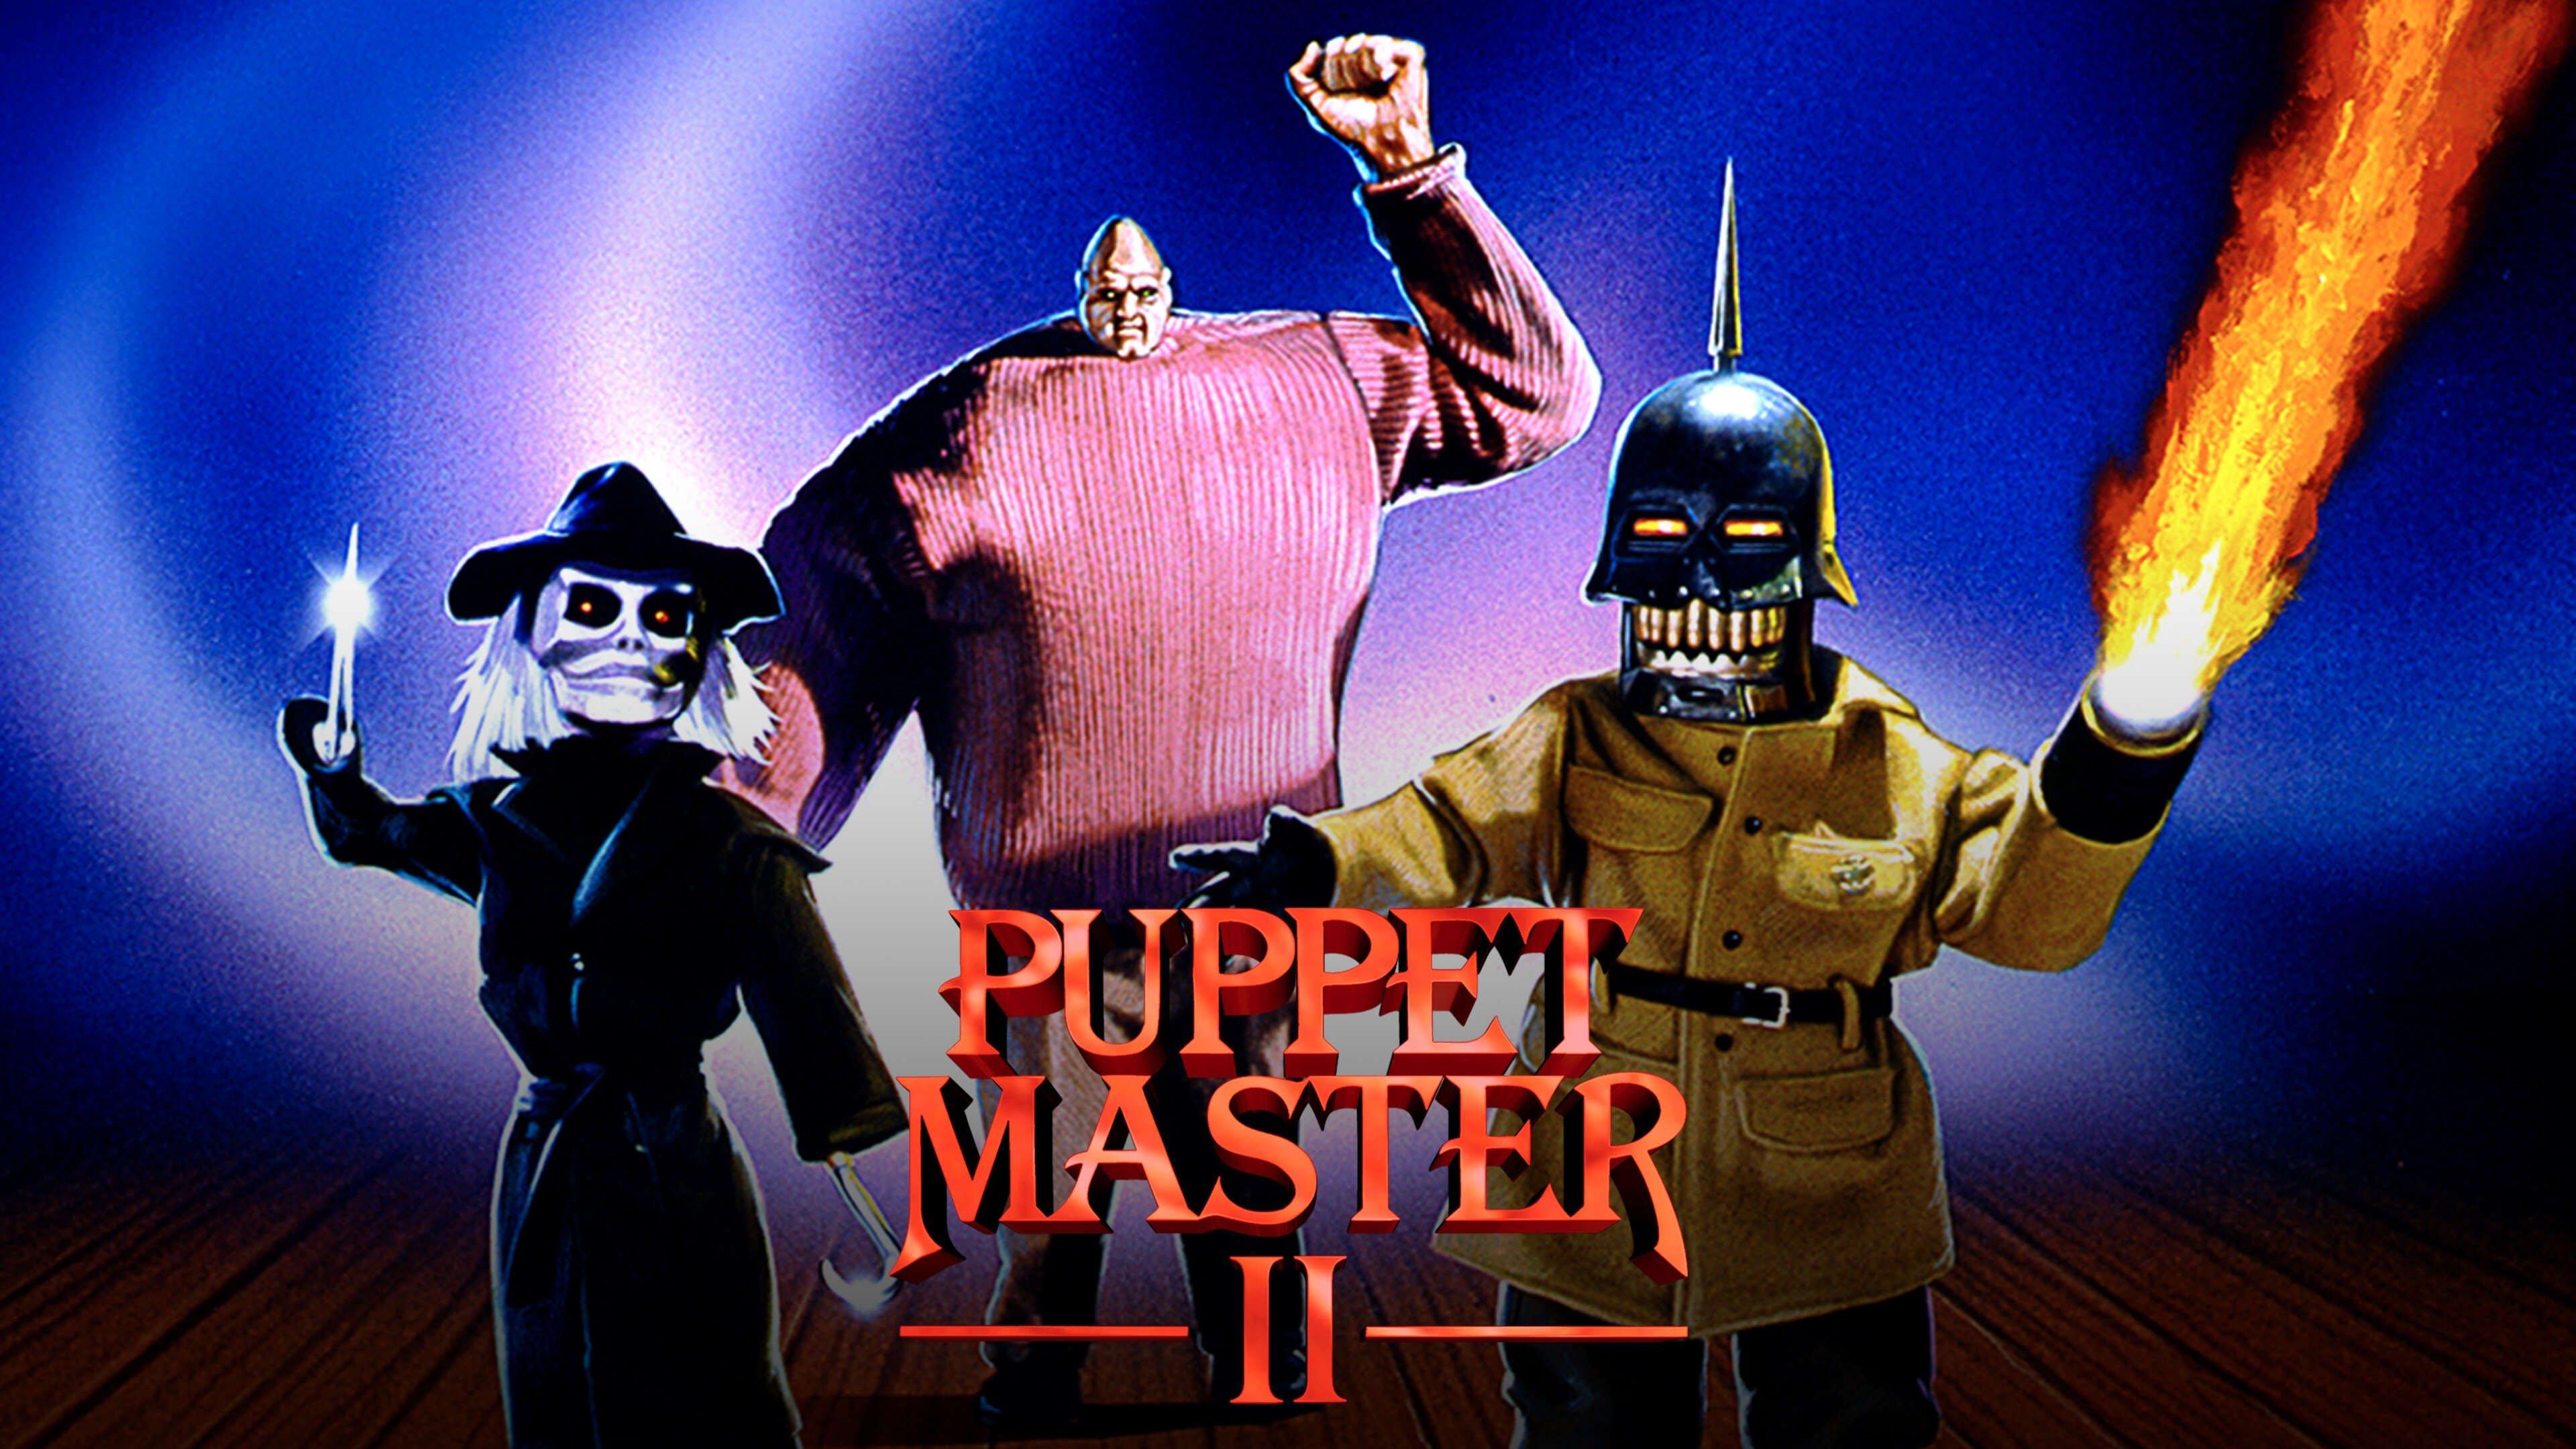 Watch Puppet Master II Streaming Online on Philo (Free Trial)